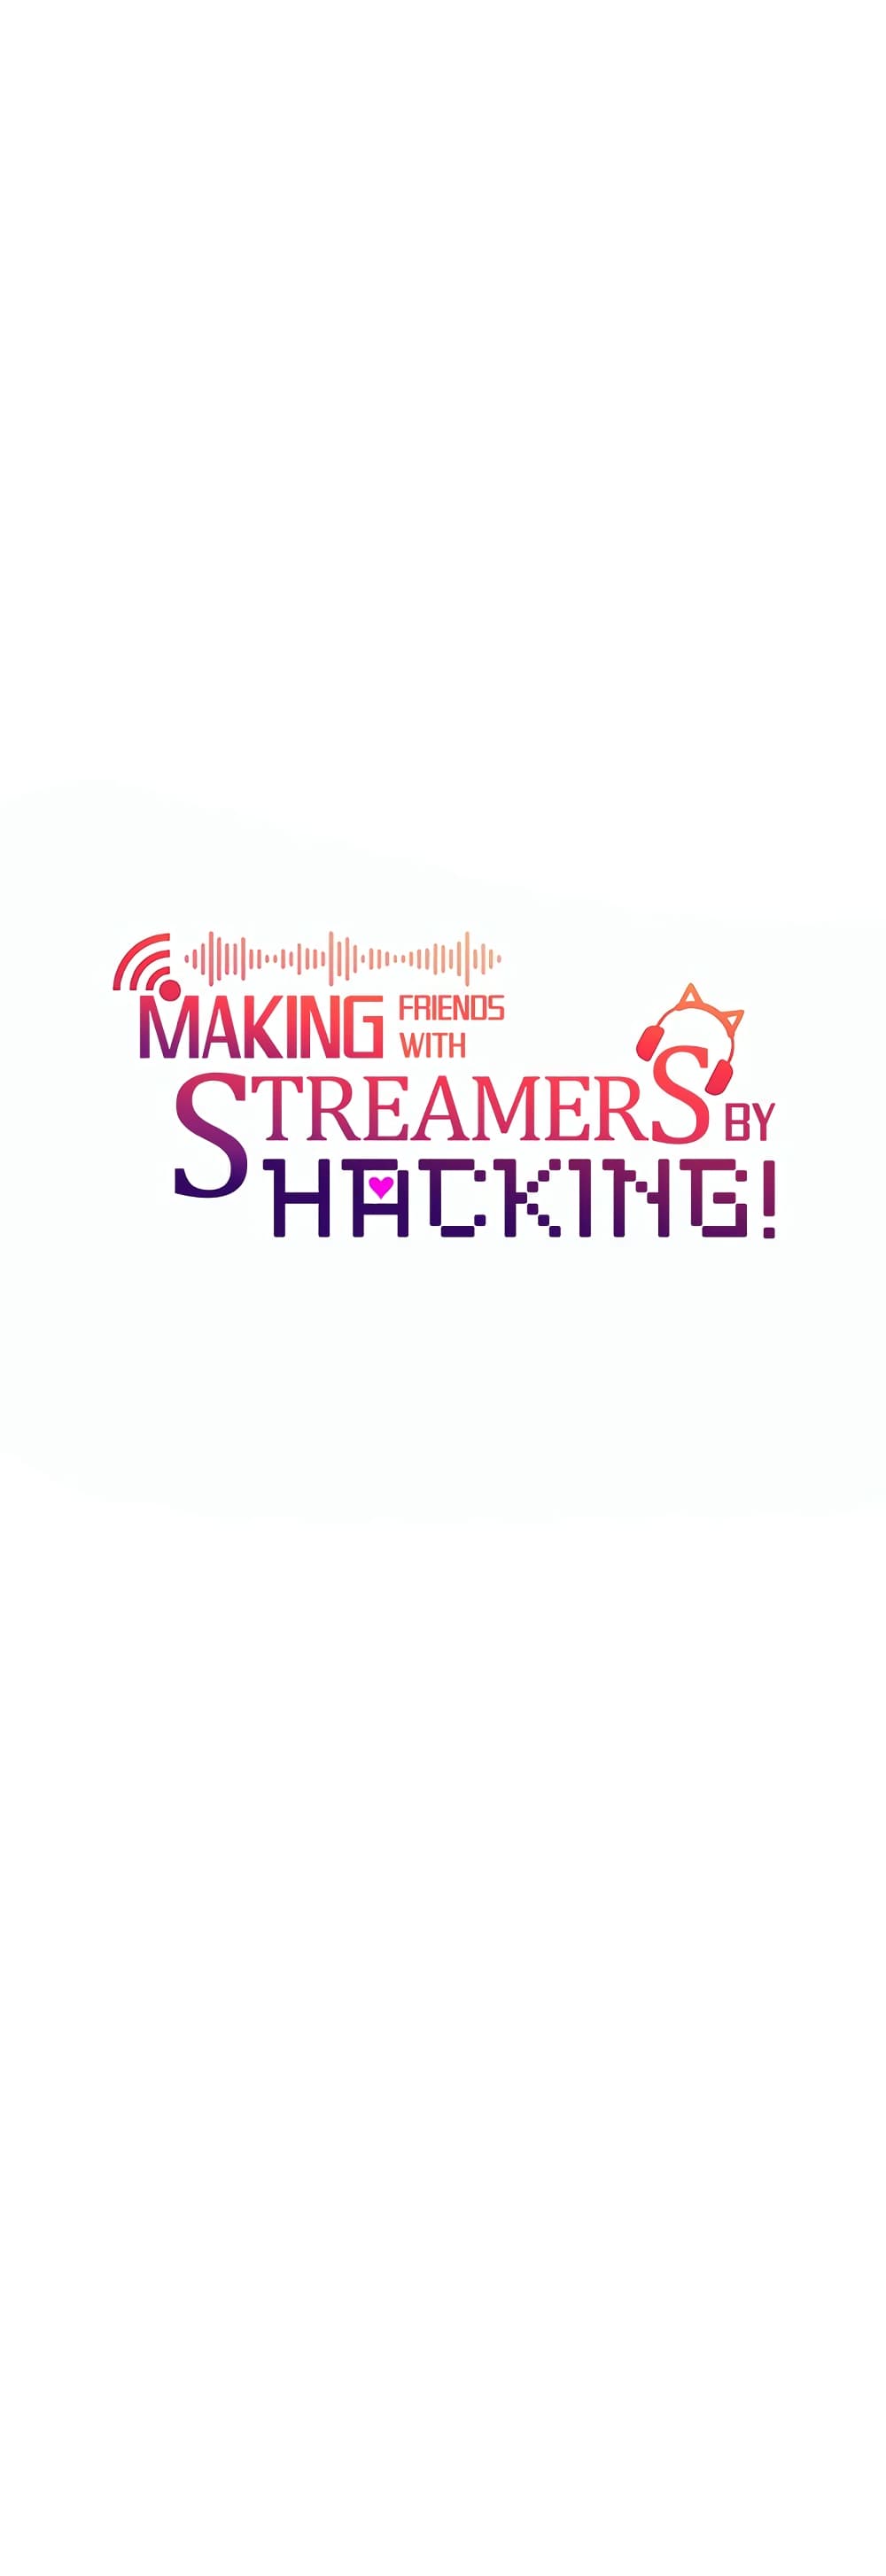 Making Friends With Streamers by Hacking! 7-7